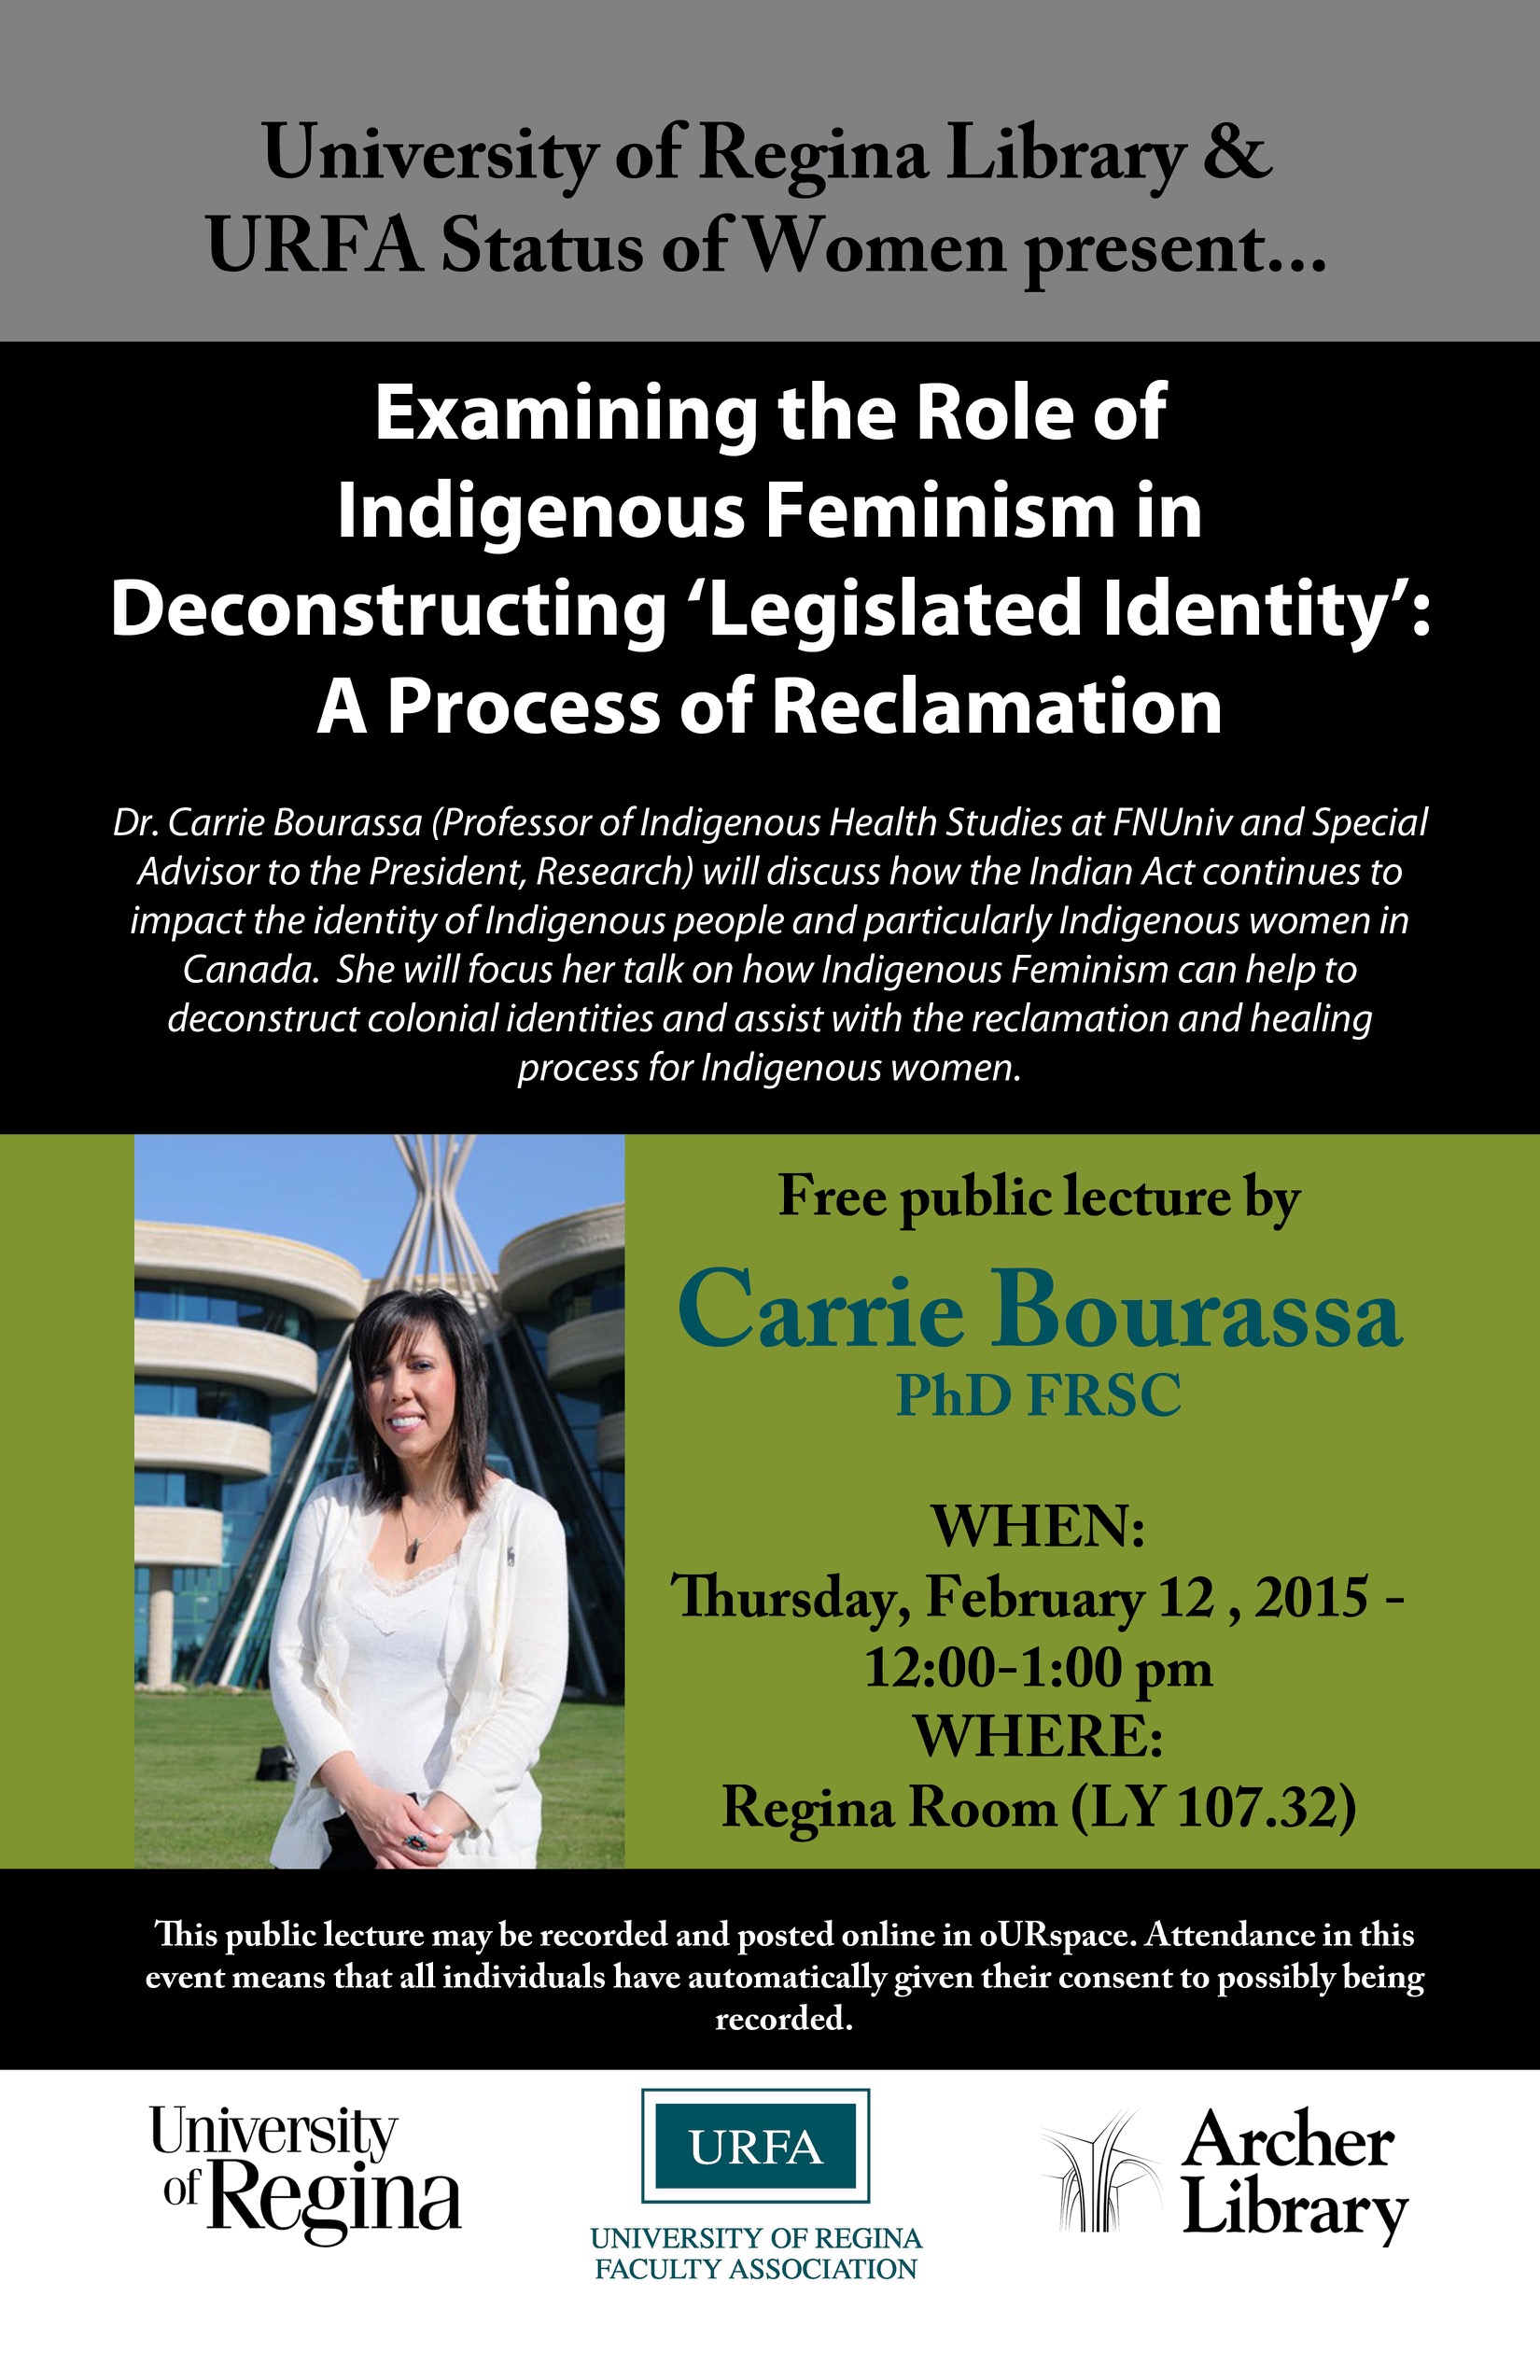 The Role of Indigenous Feminism in Deconstructing Legislated Identity